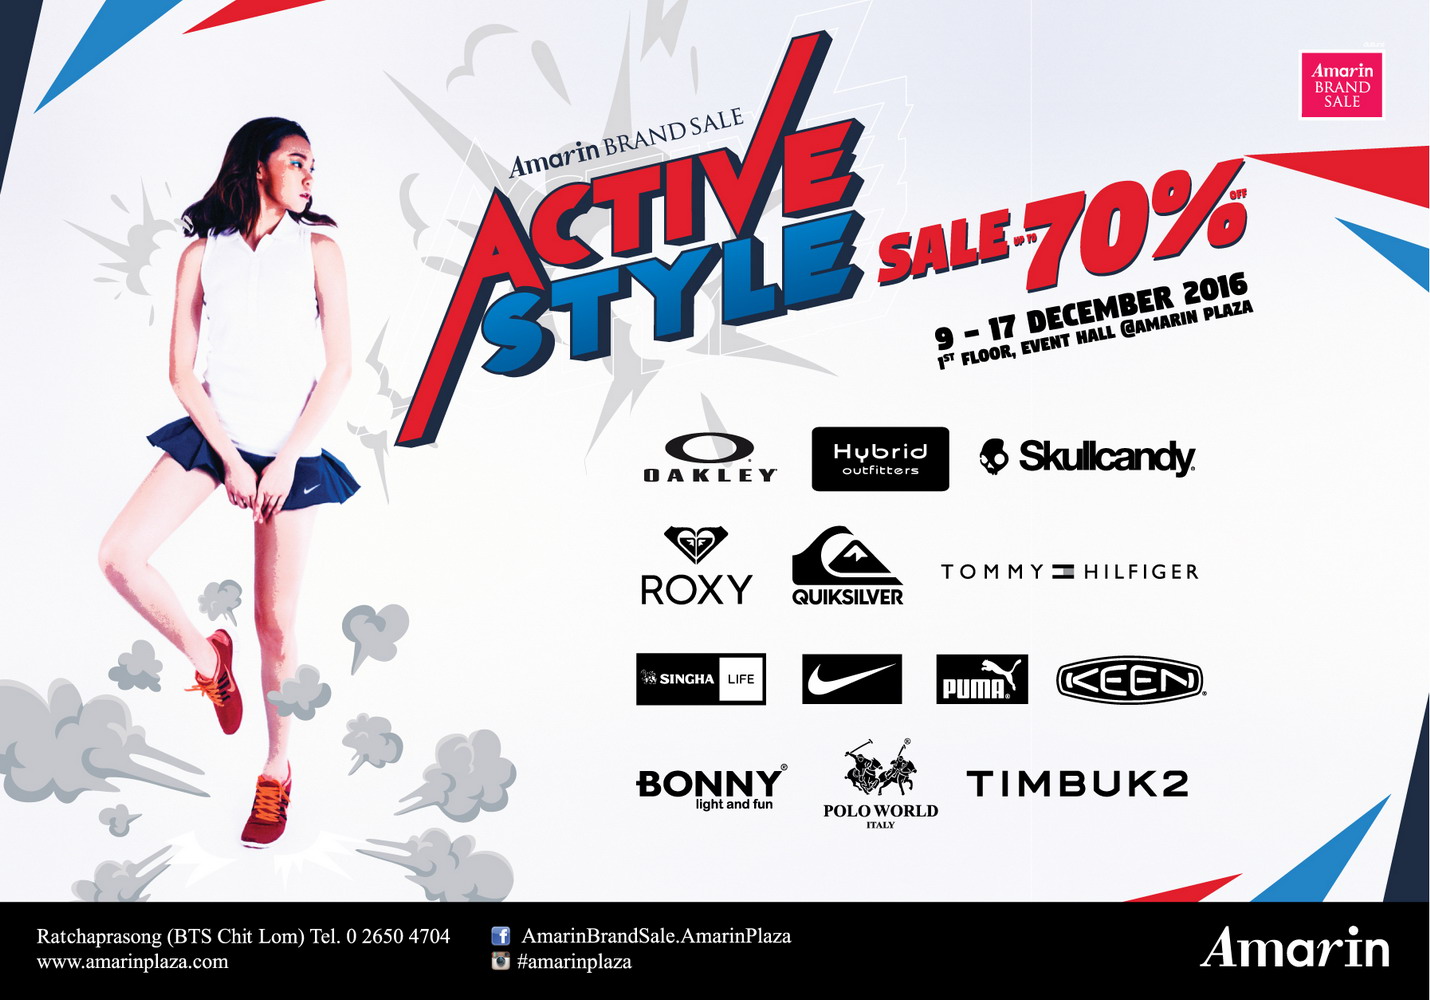 Amarin Brand Sale: Active Style sale up to 70%